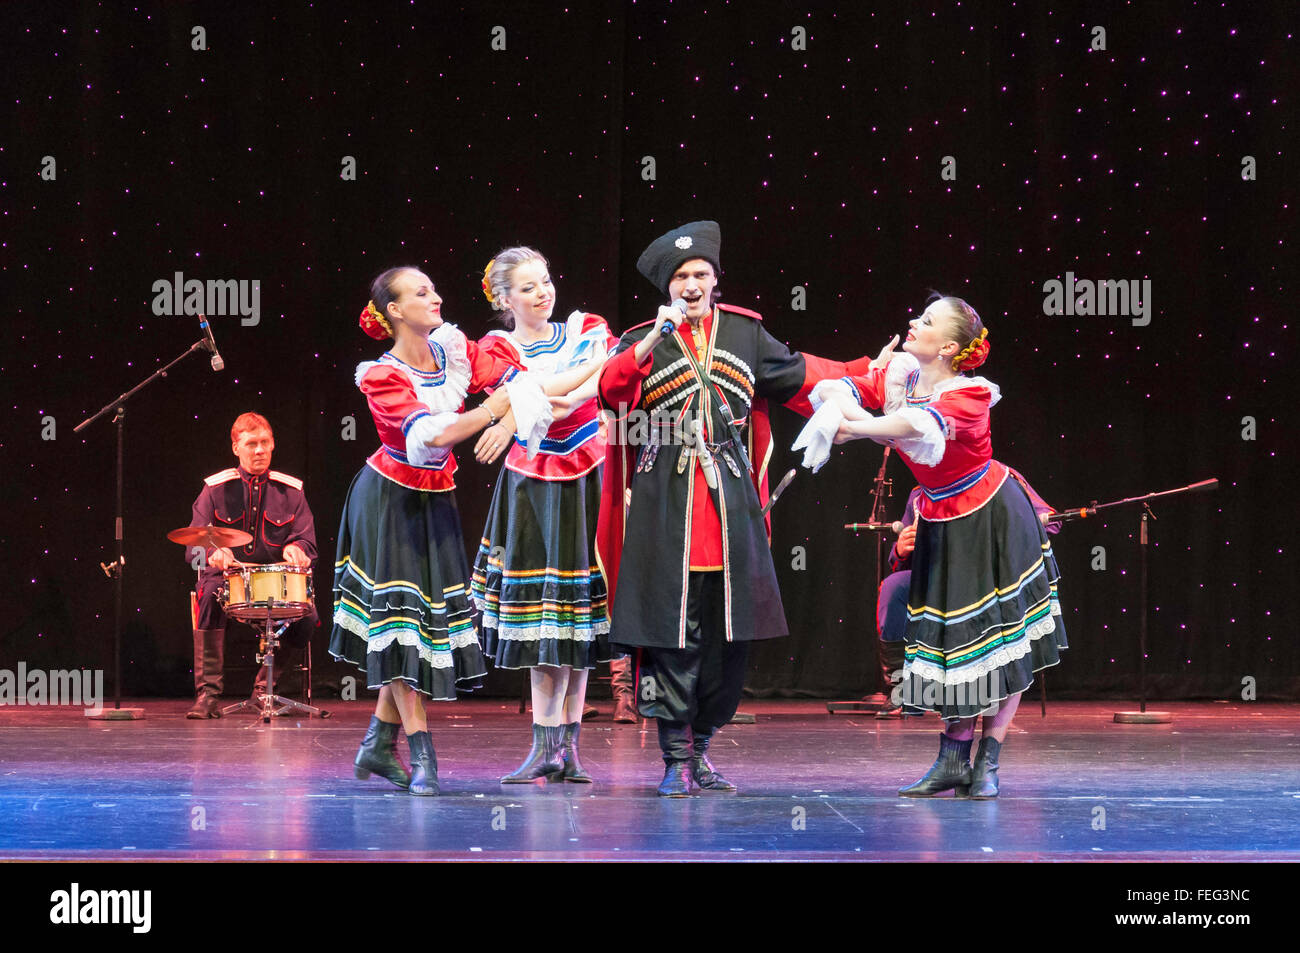 Russian folk dancers performing in The Pacifica Theatre, Royal Caribbean's Brilliance of the Seas cruise ship, North Sea, Europe Stock Photo